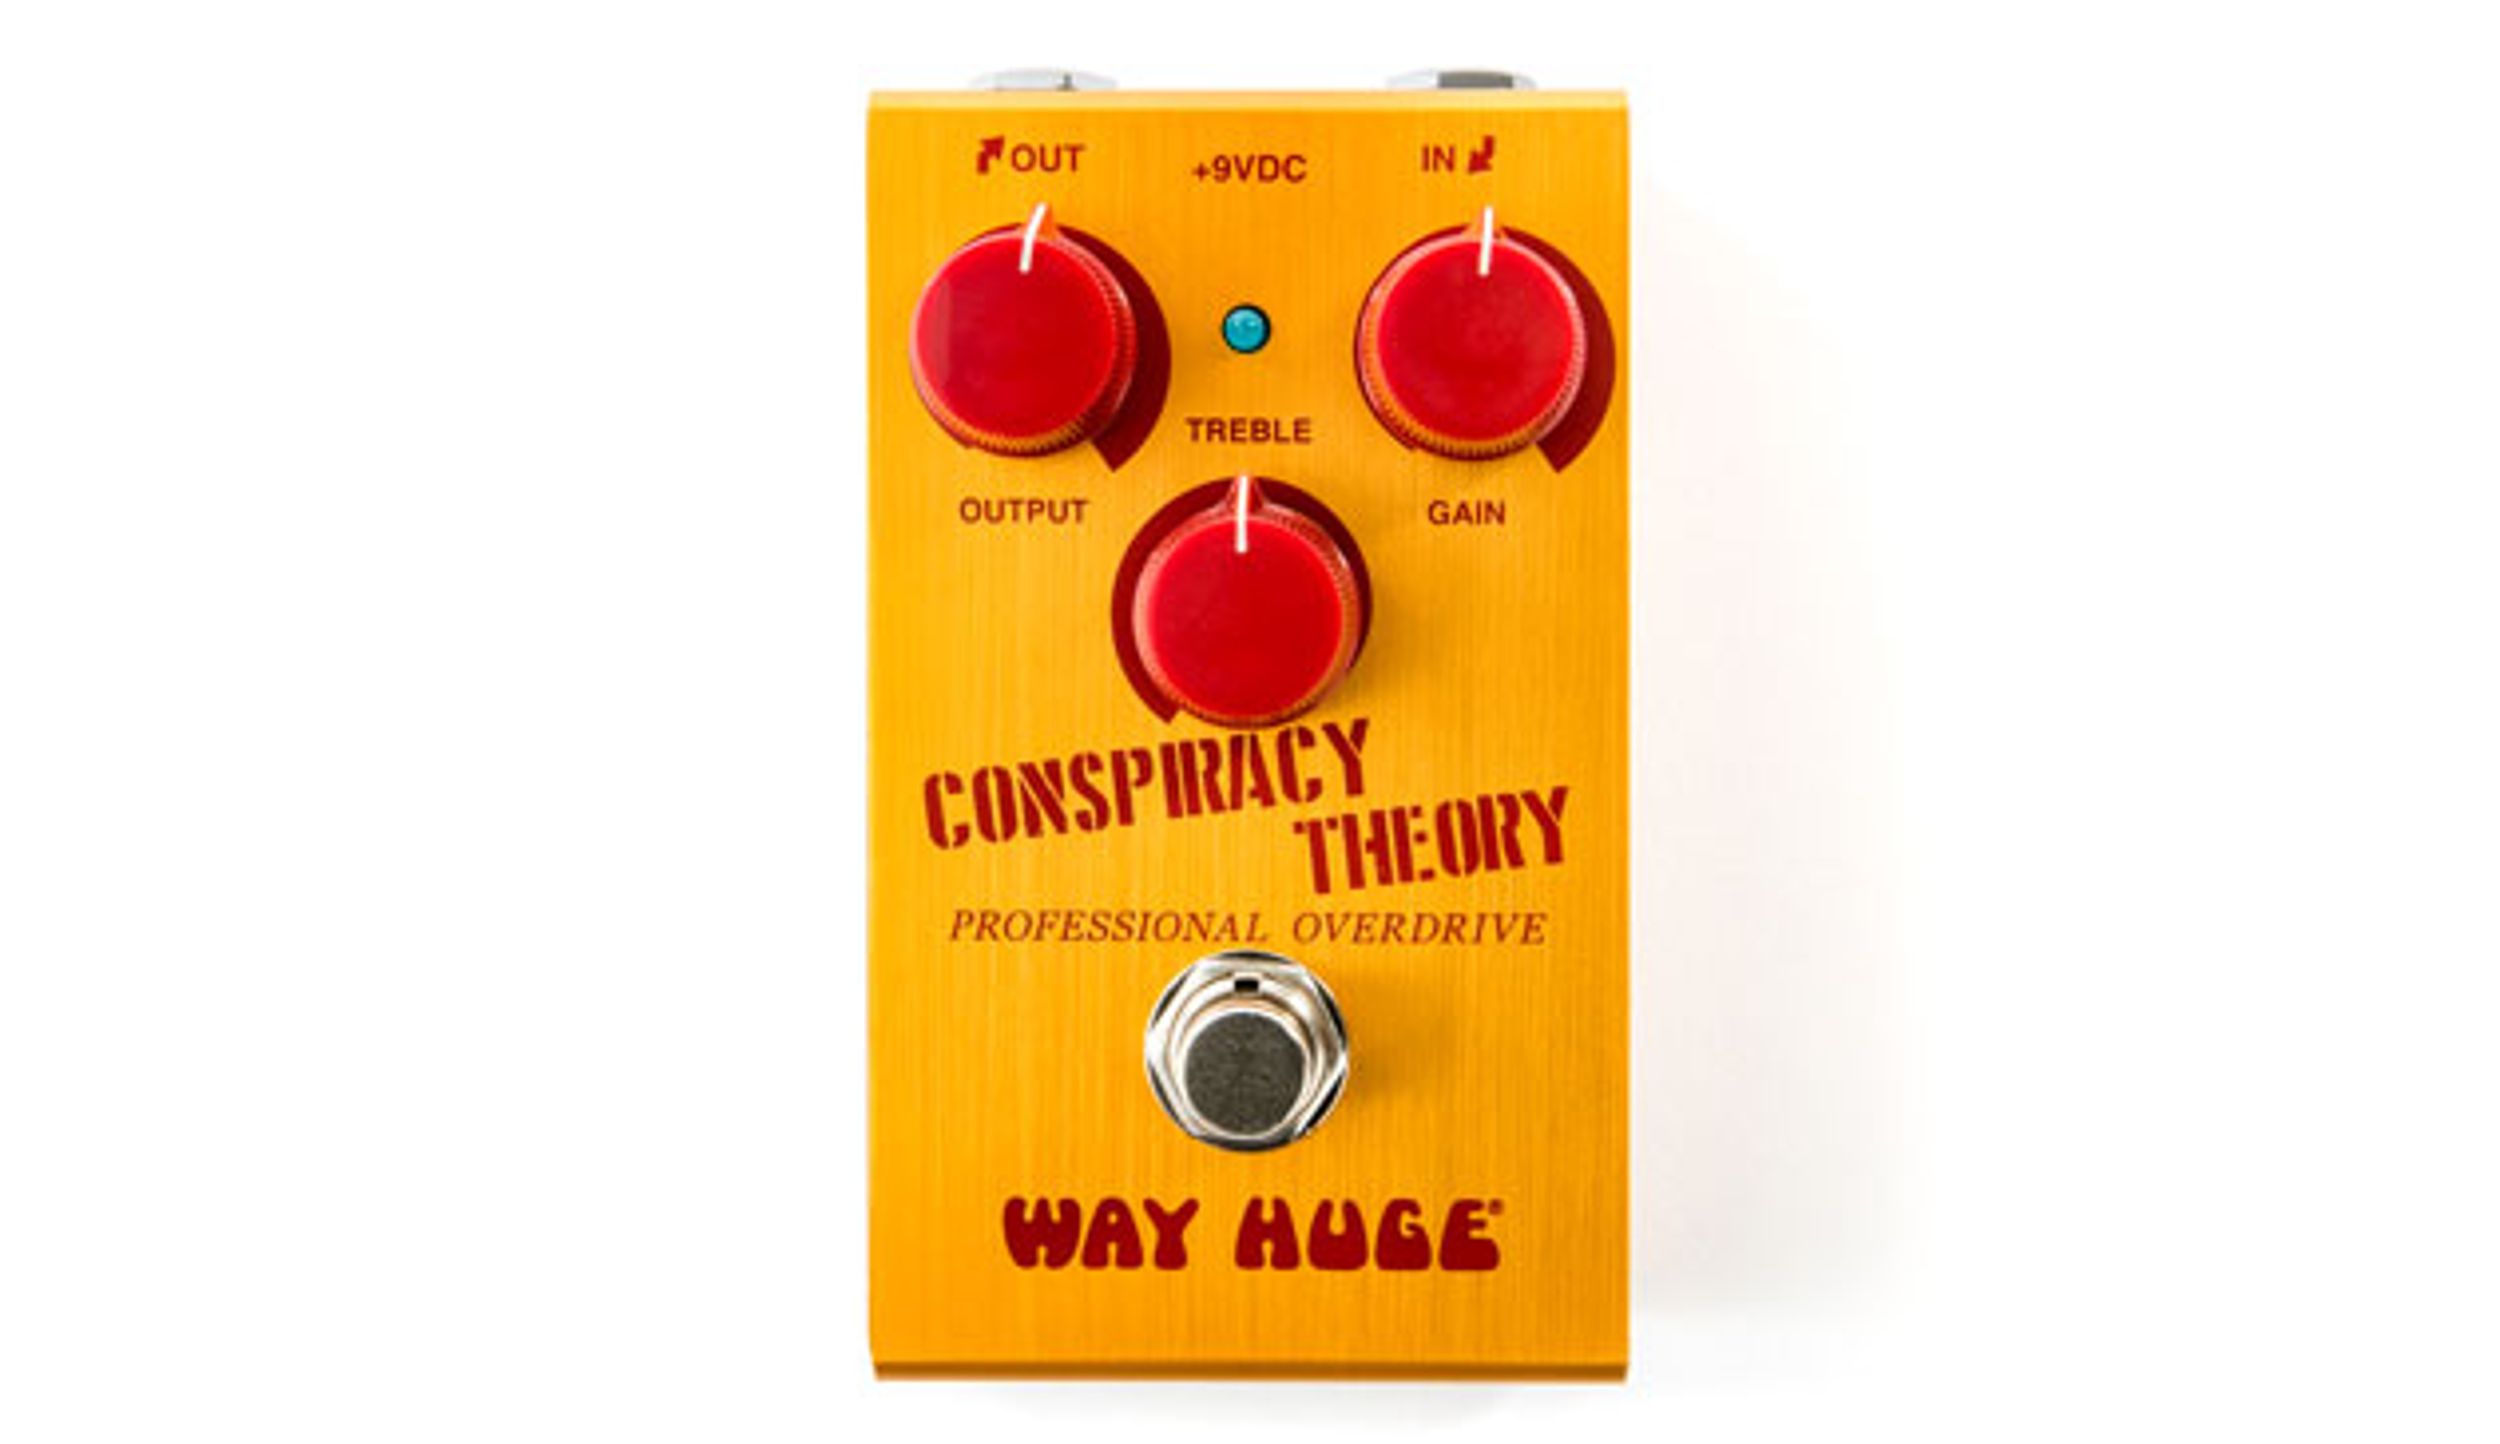 Way Huge Unveils the Conspiracy Theory Professional Overdrive